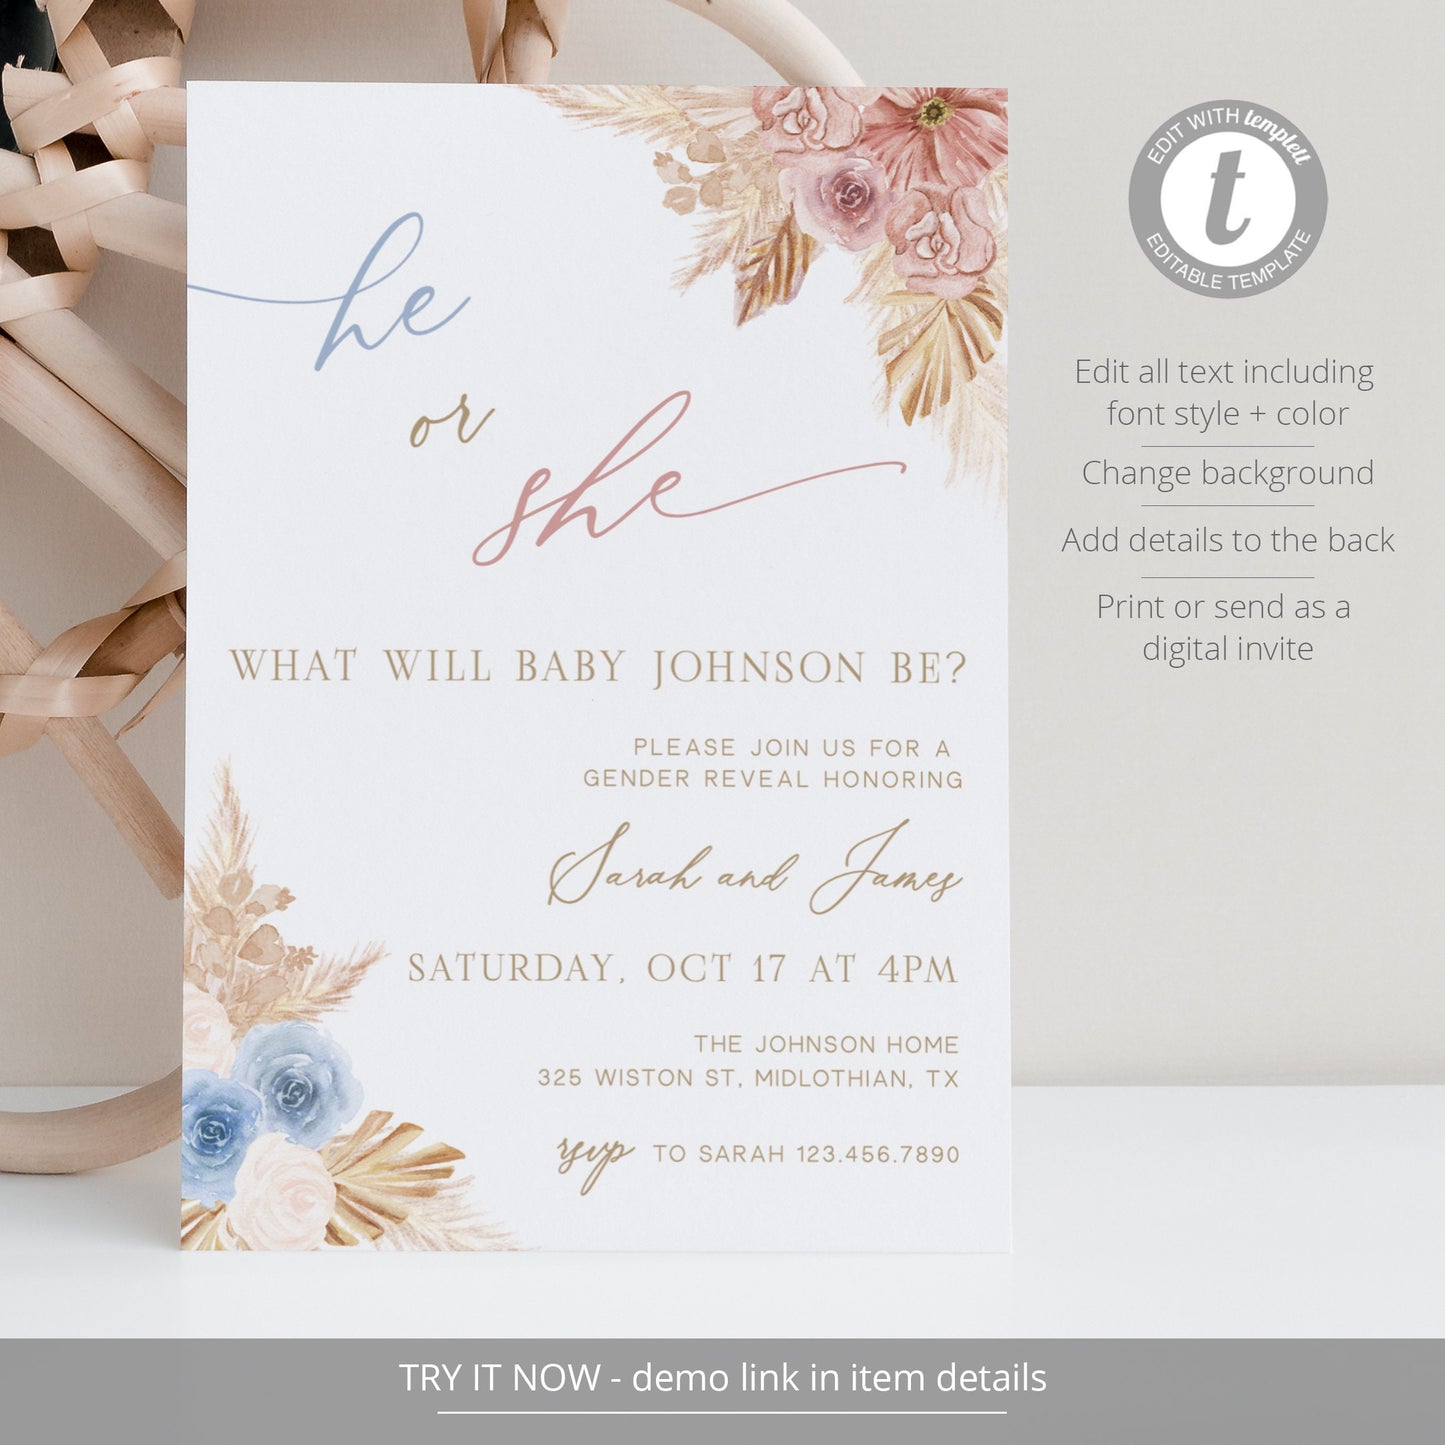 Editable Boho Gender Reveal Invitation He or She Gender Reveal Invite Blue and Pink Pampas Grass Brooks Template